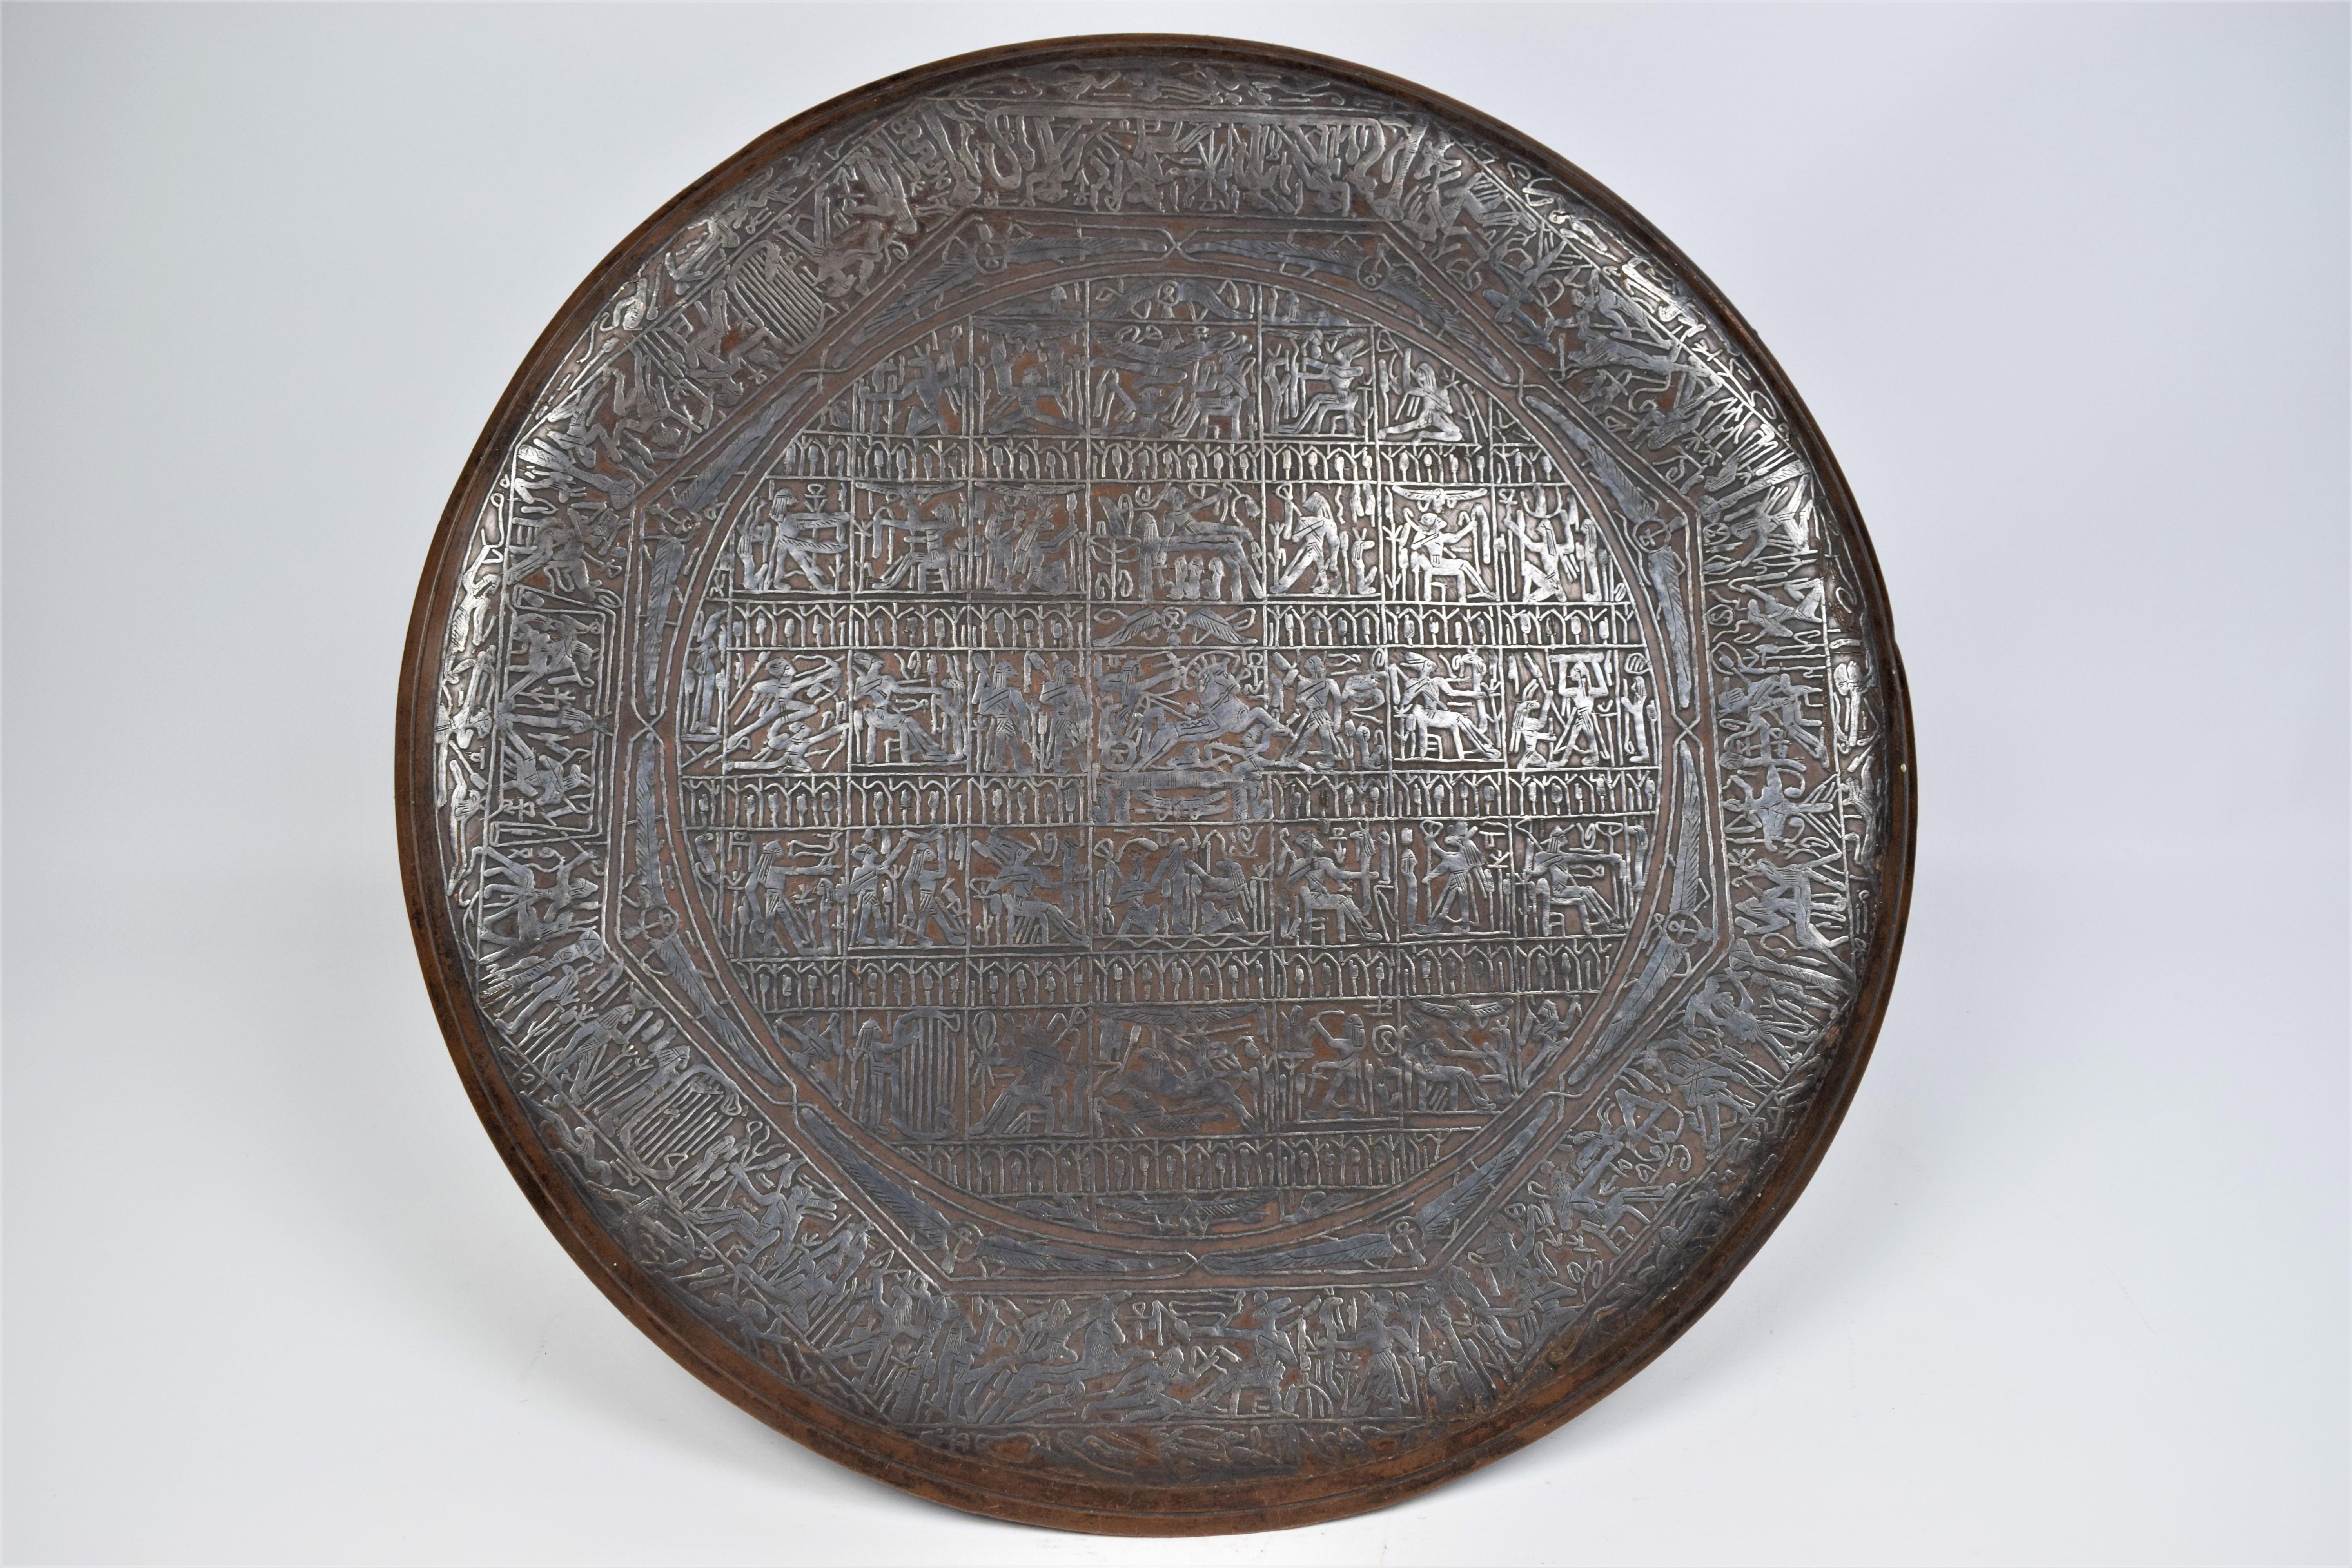 The large-scale copper charger plate with silver inlay is a truly awe-inspiring work of art. Its grand size and intricate design make it a captivating piece that commands attention and admiration.

The copper charger plate serves as the canvas for